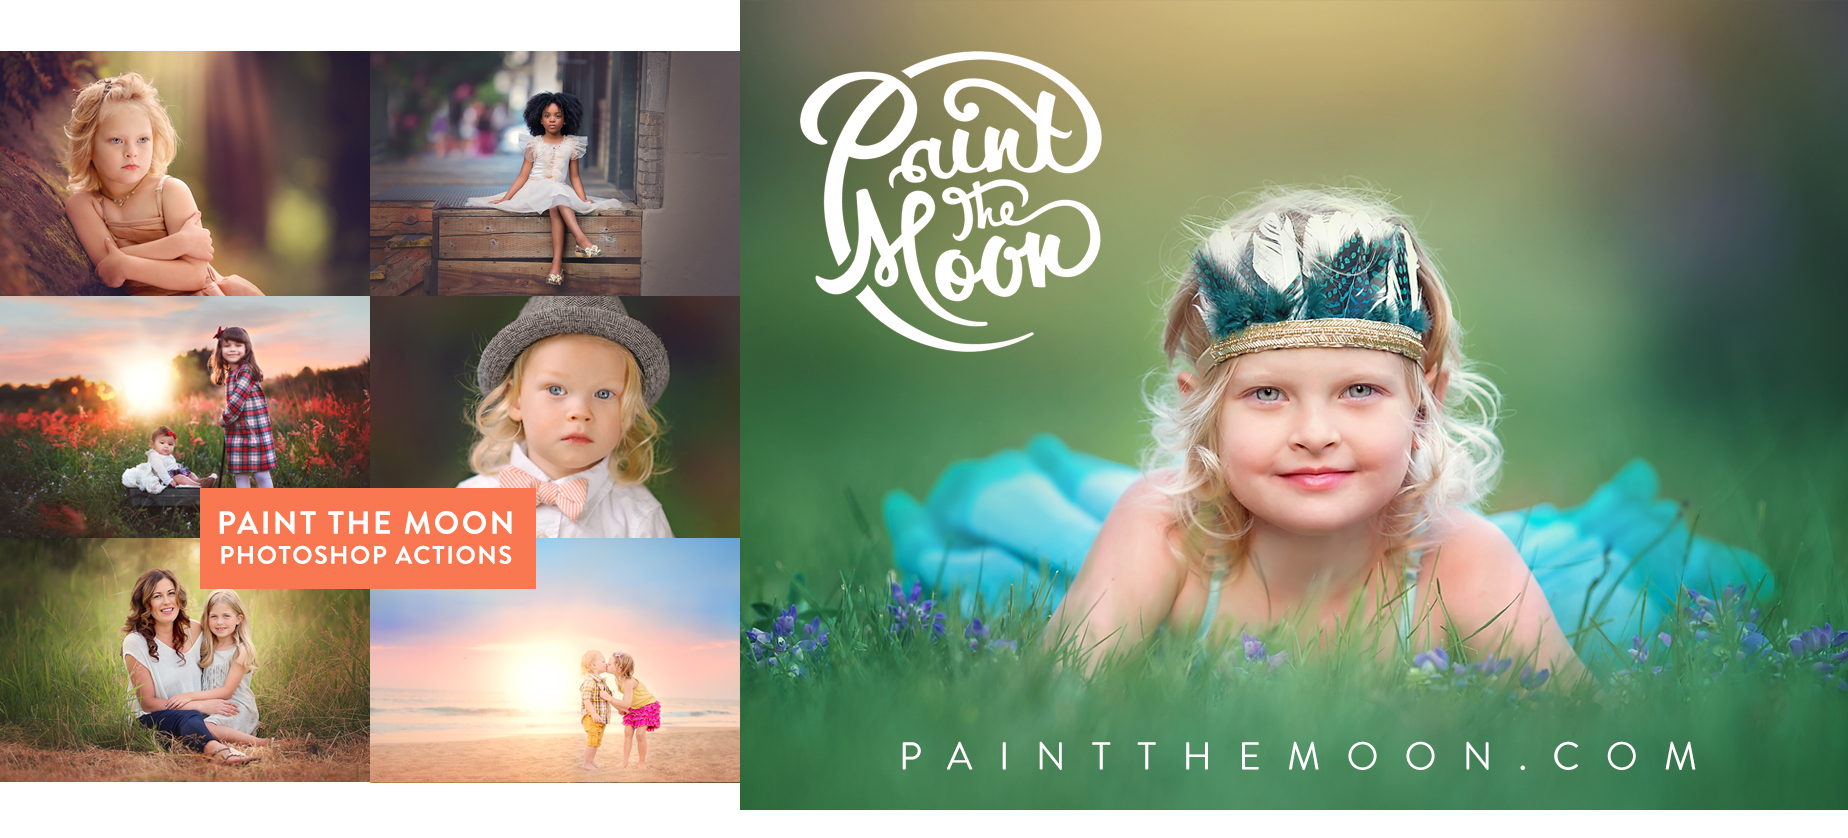 paint the moon photoshop actions free download